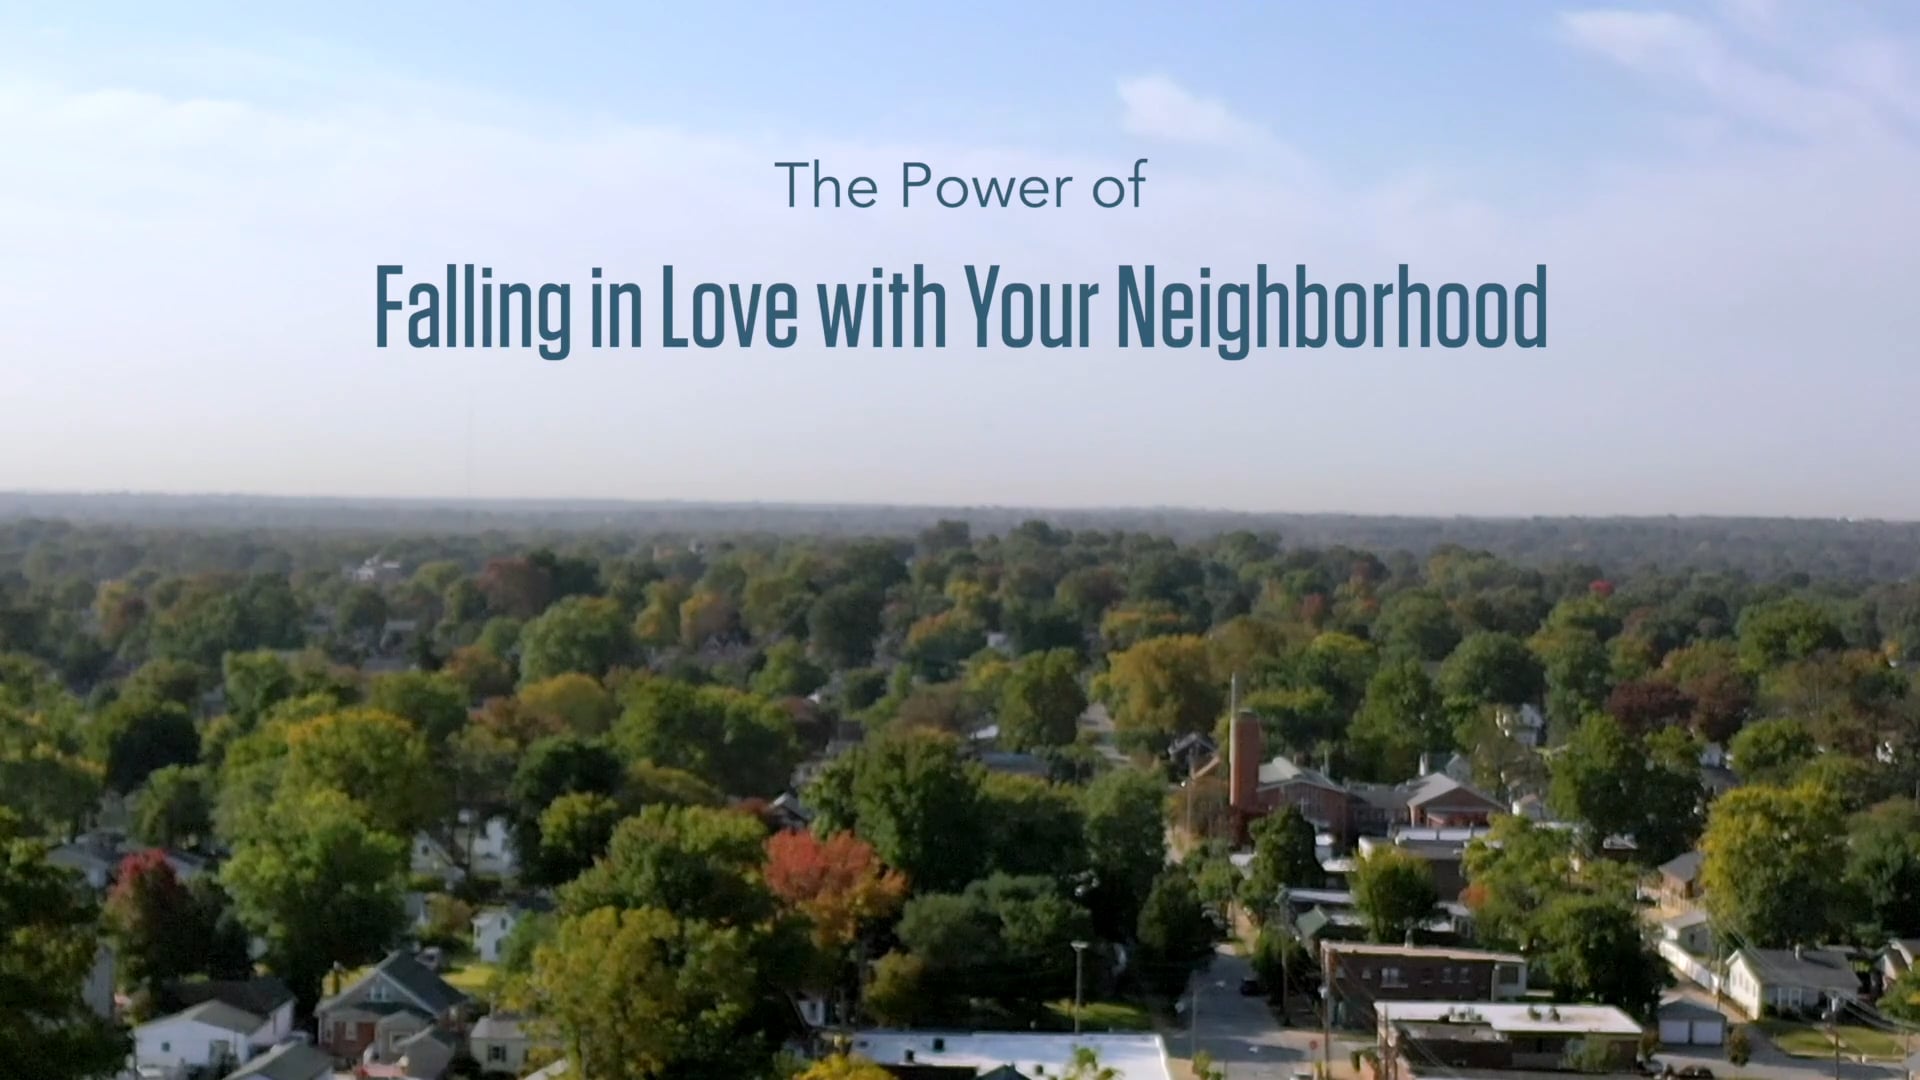 The Power of Falling In Love with Your Neighborhood